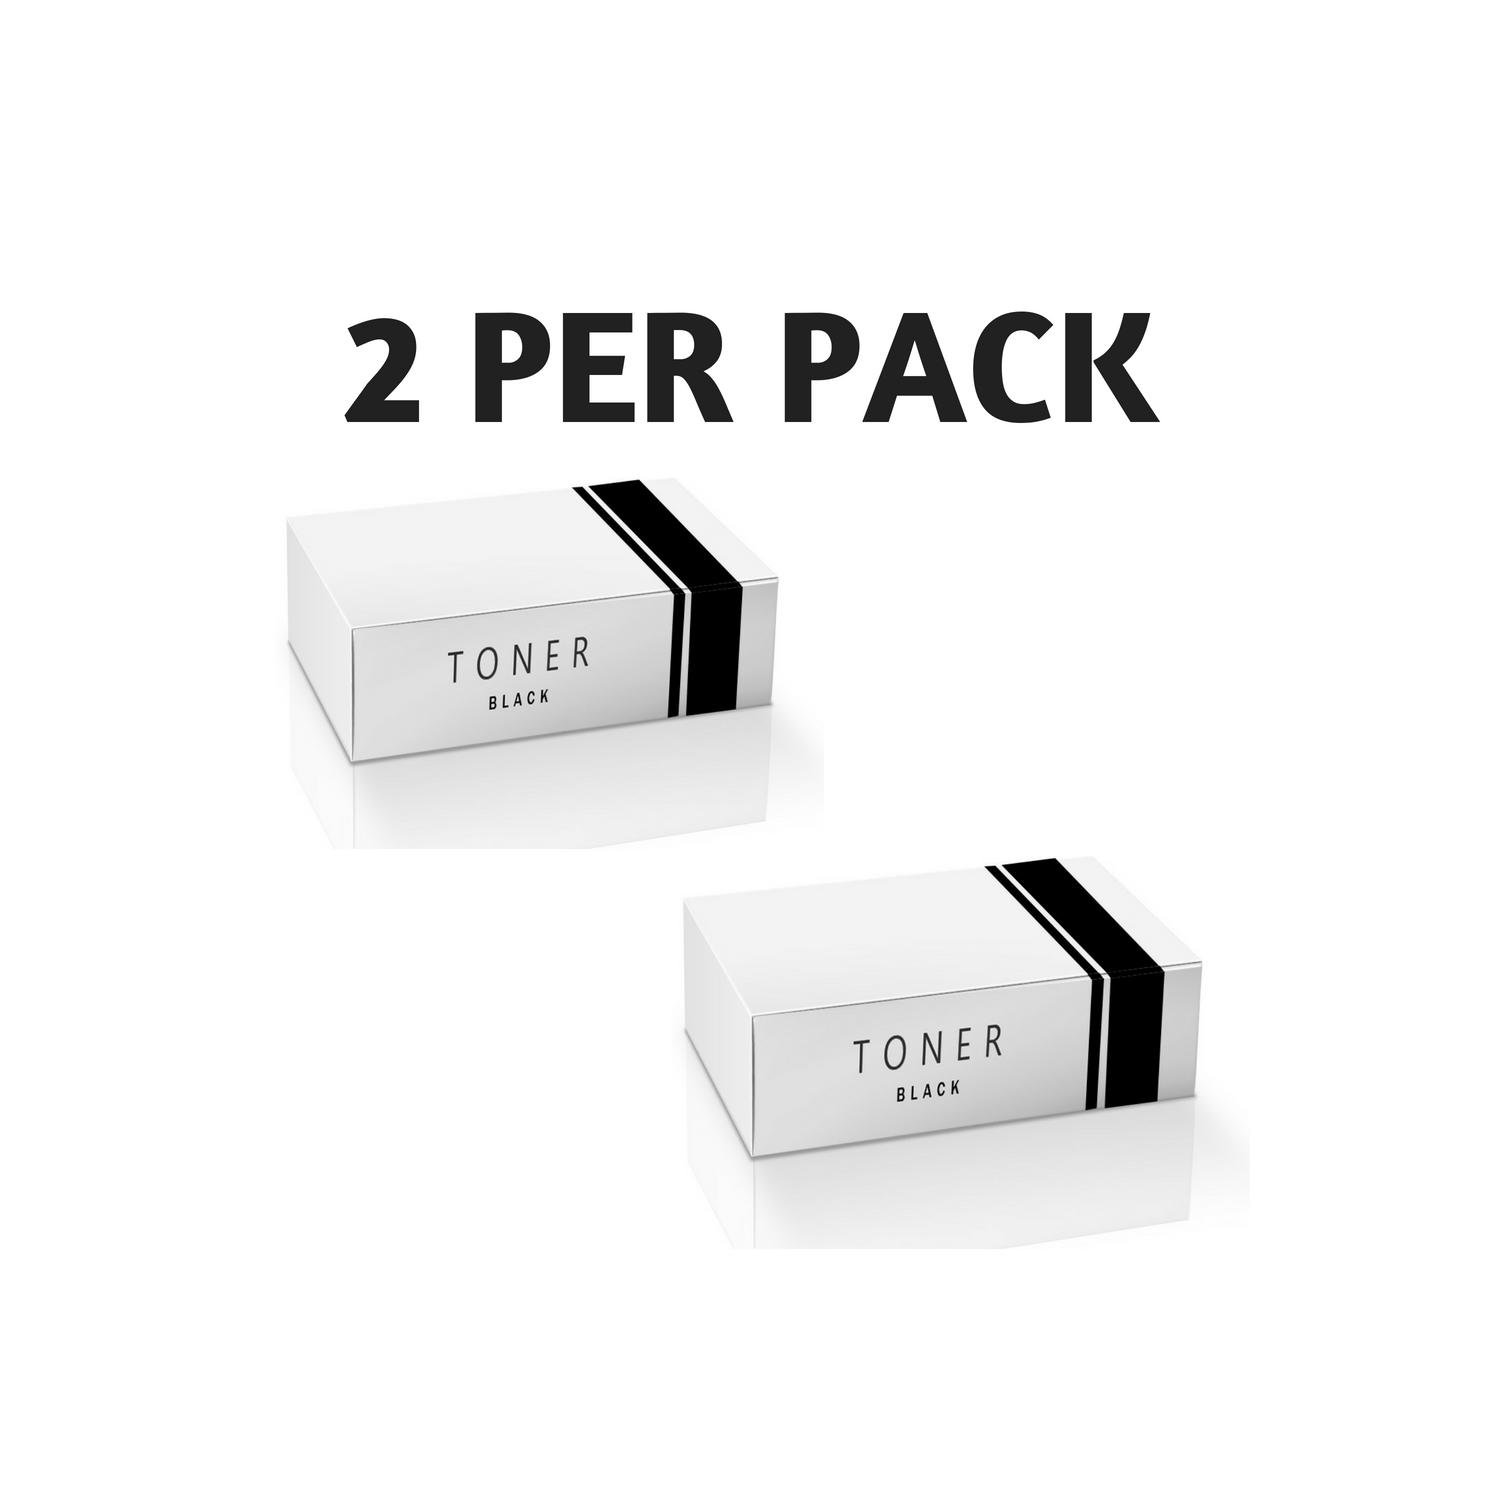 Generic Samsung MLT-D101S New Black Toner Cartridge - 2 Pack -Free Shipping Over $50 (101S)